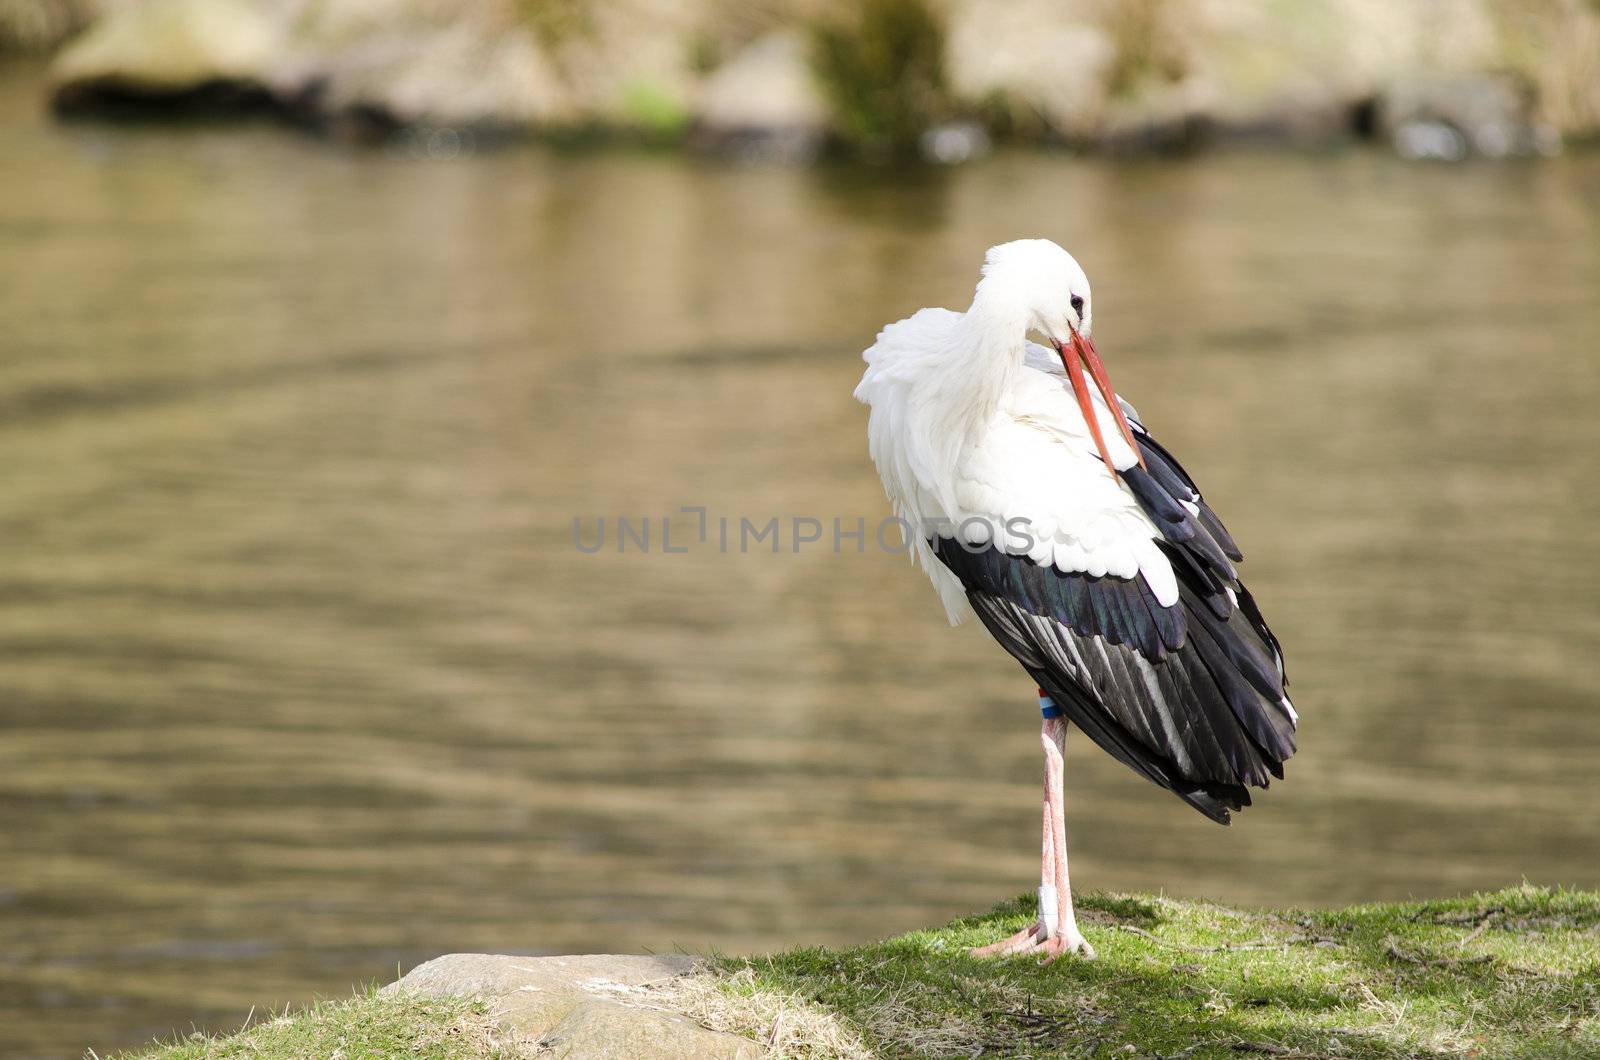 White stork at a lake (Ciconia ciconia) in early spring cleaning its feathers